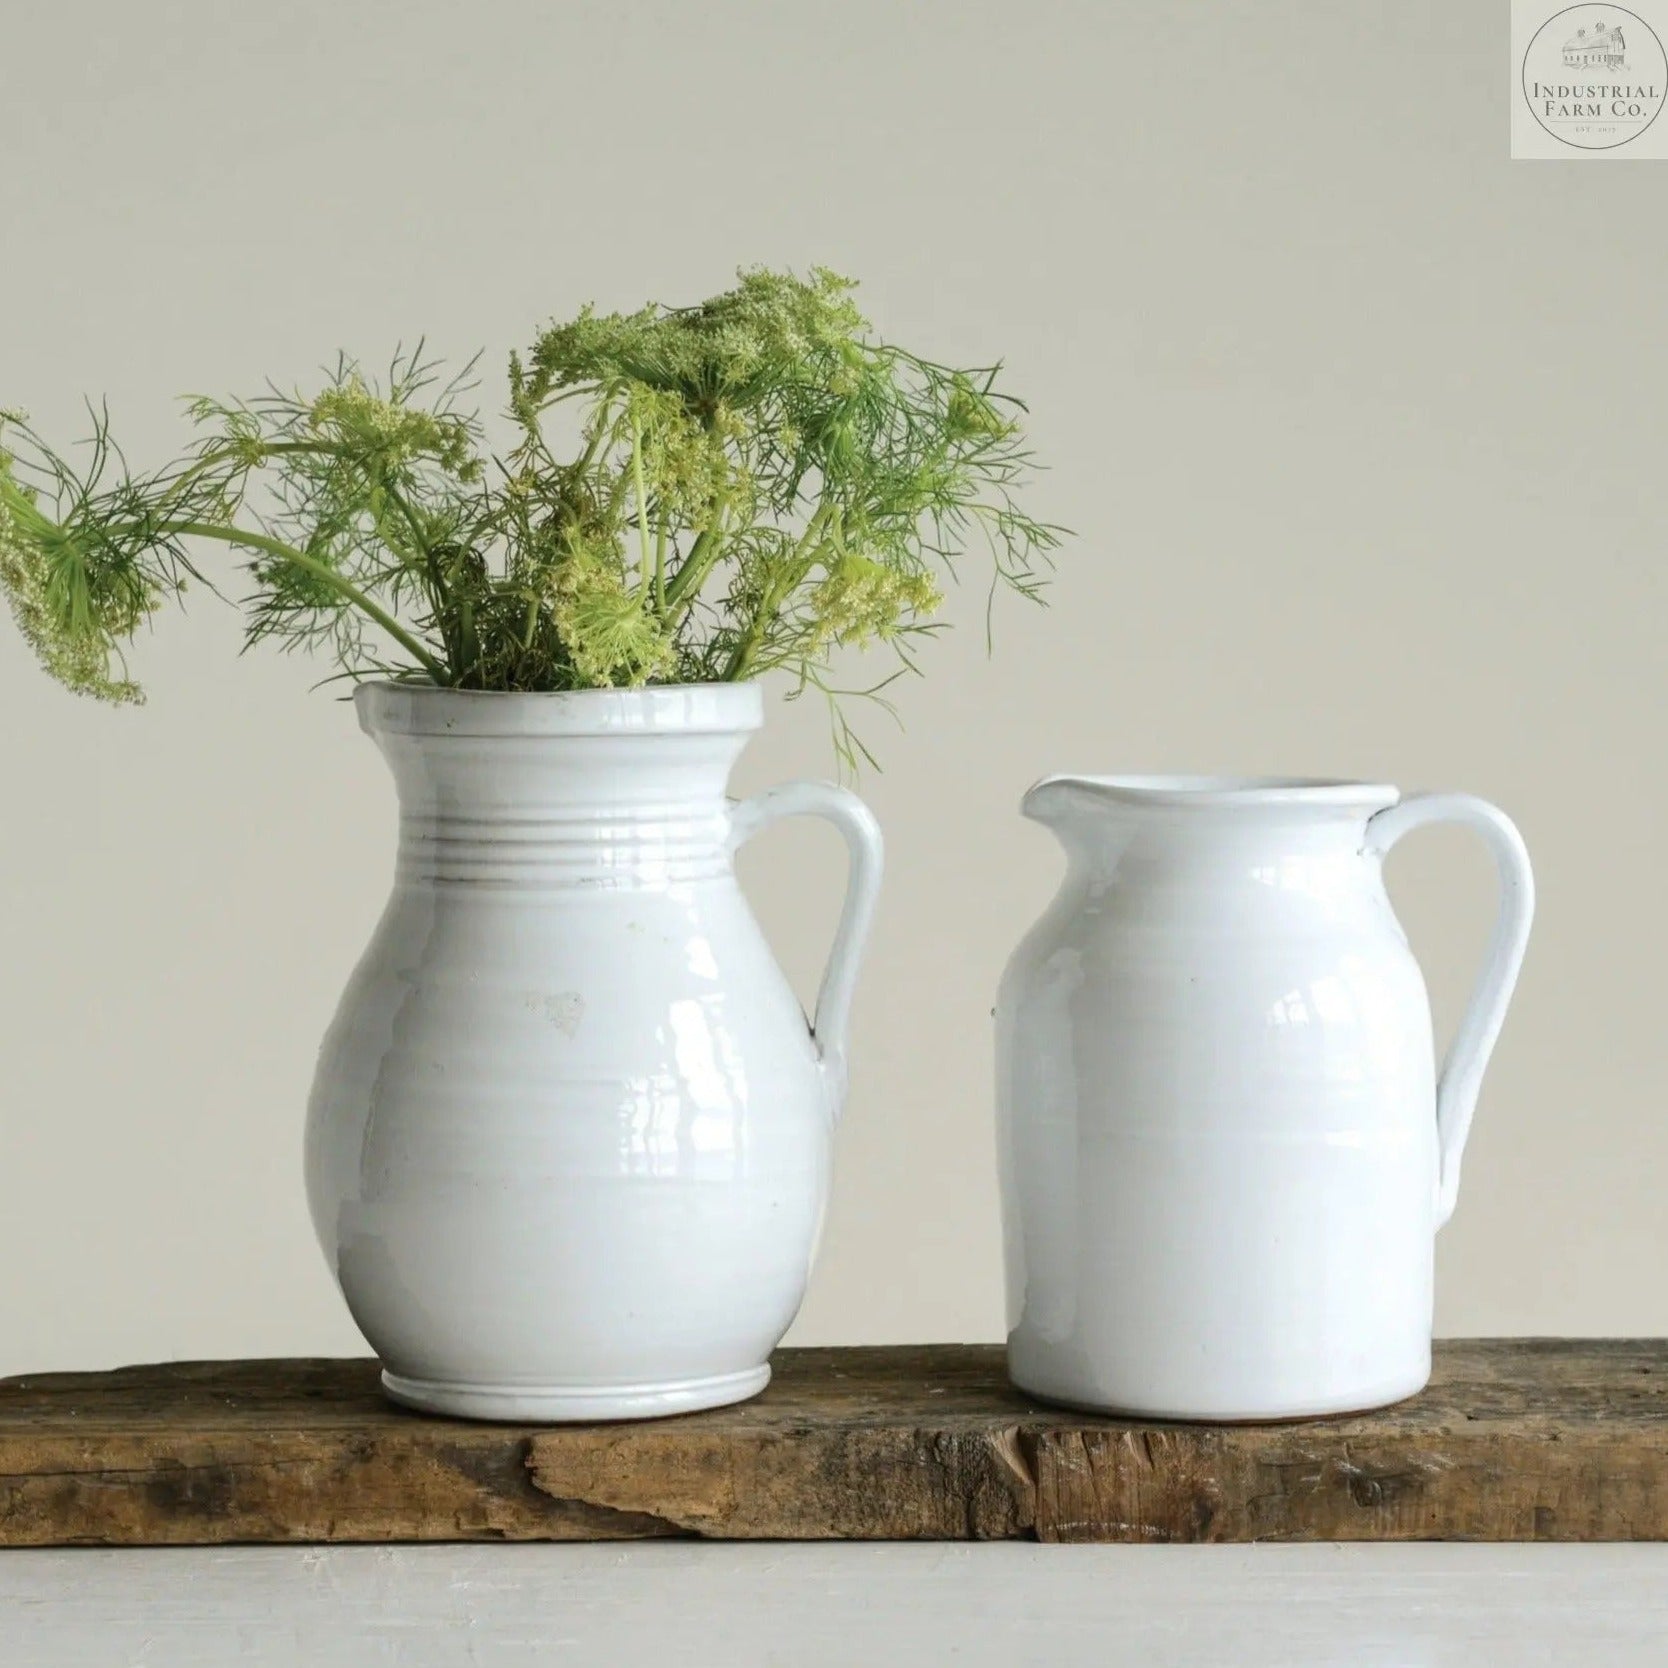 Country Style Terracotta Pitcher     | Industrial Farm Co